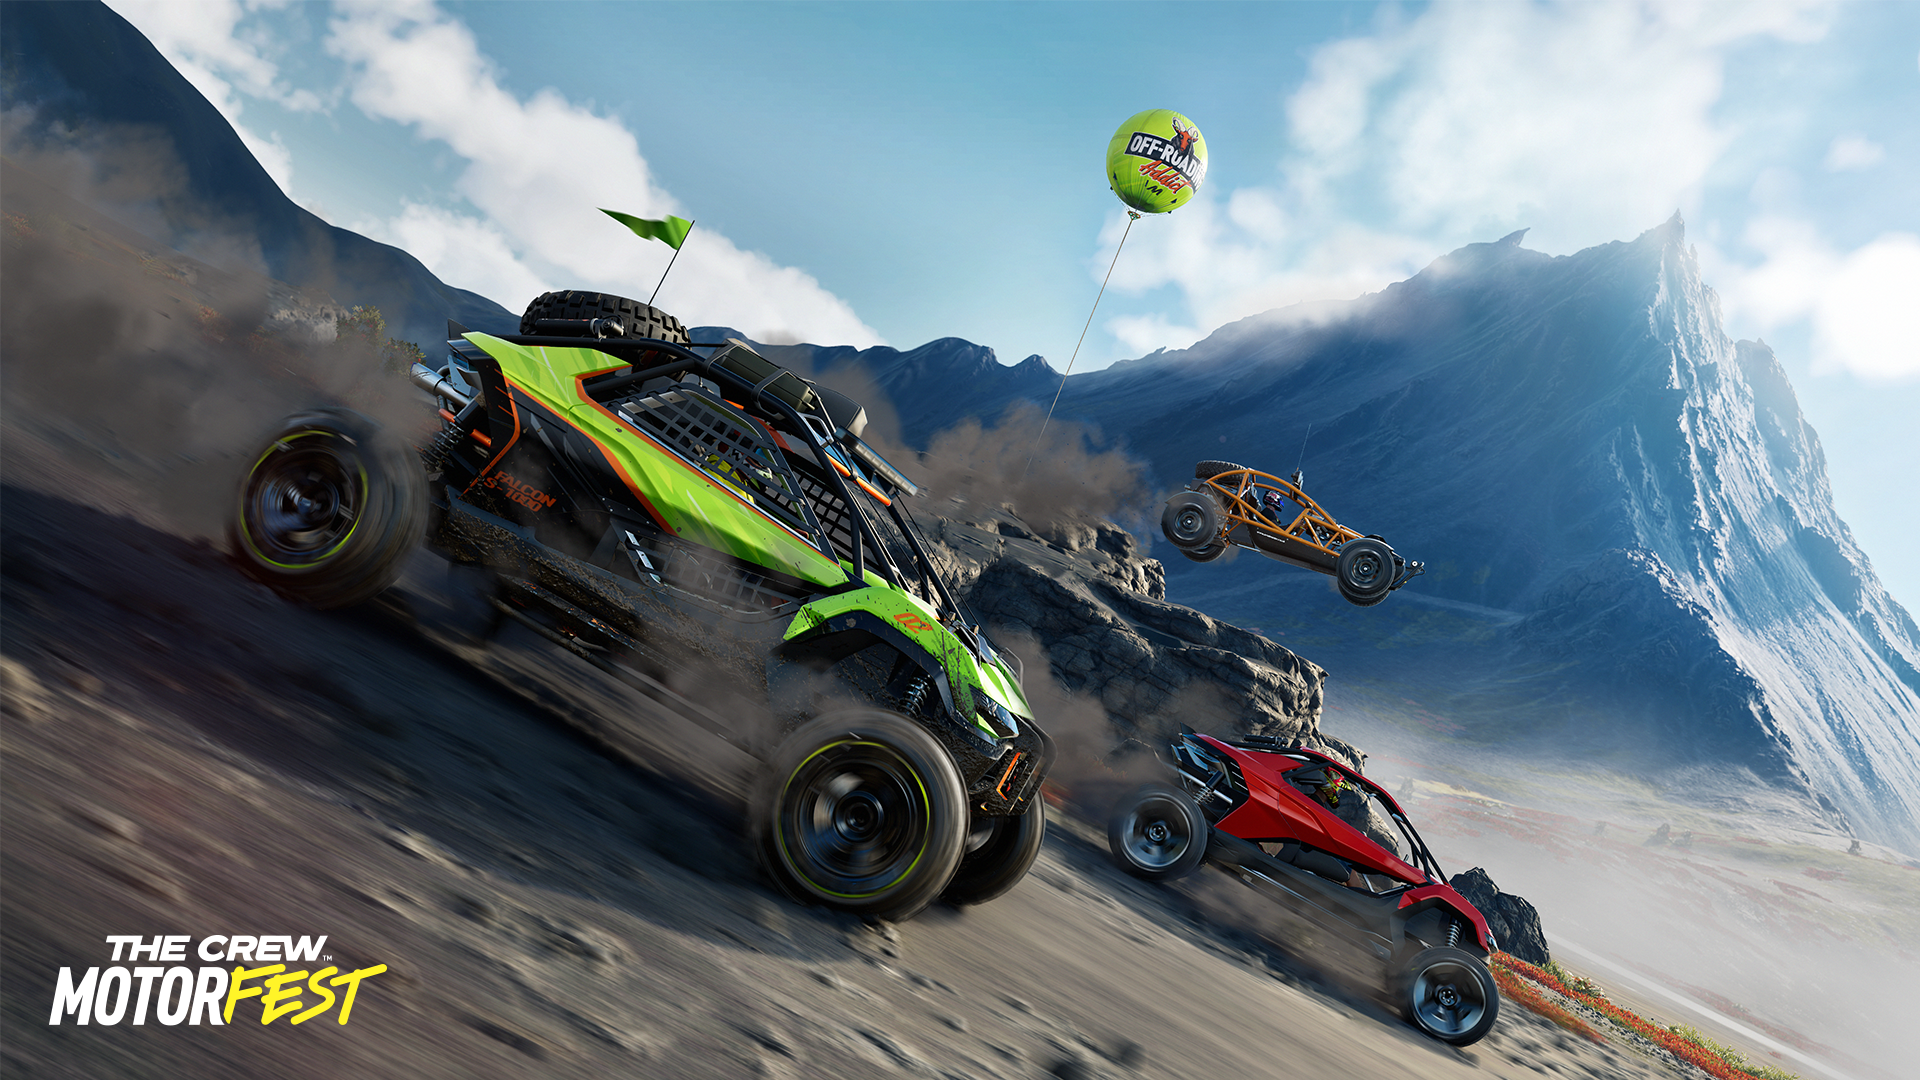 The Crew: Motorfest Review (Xbox Series X/S) — Games Enquirer